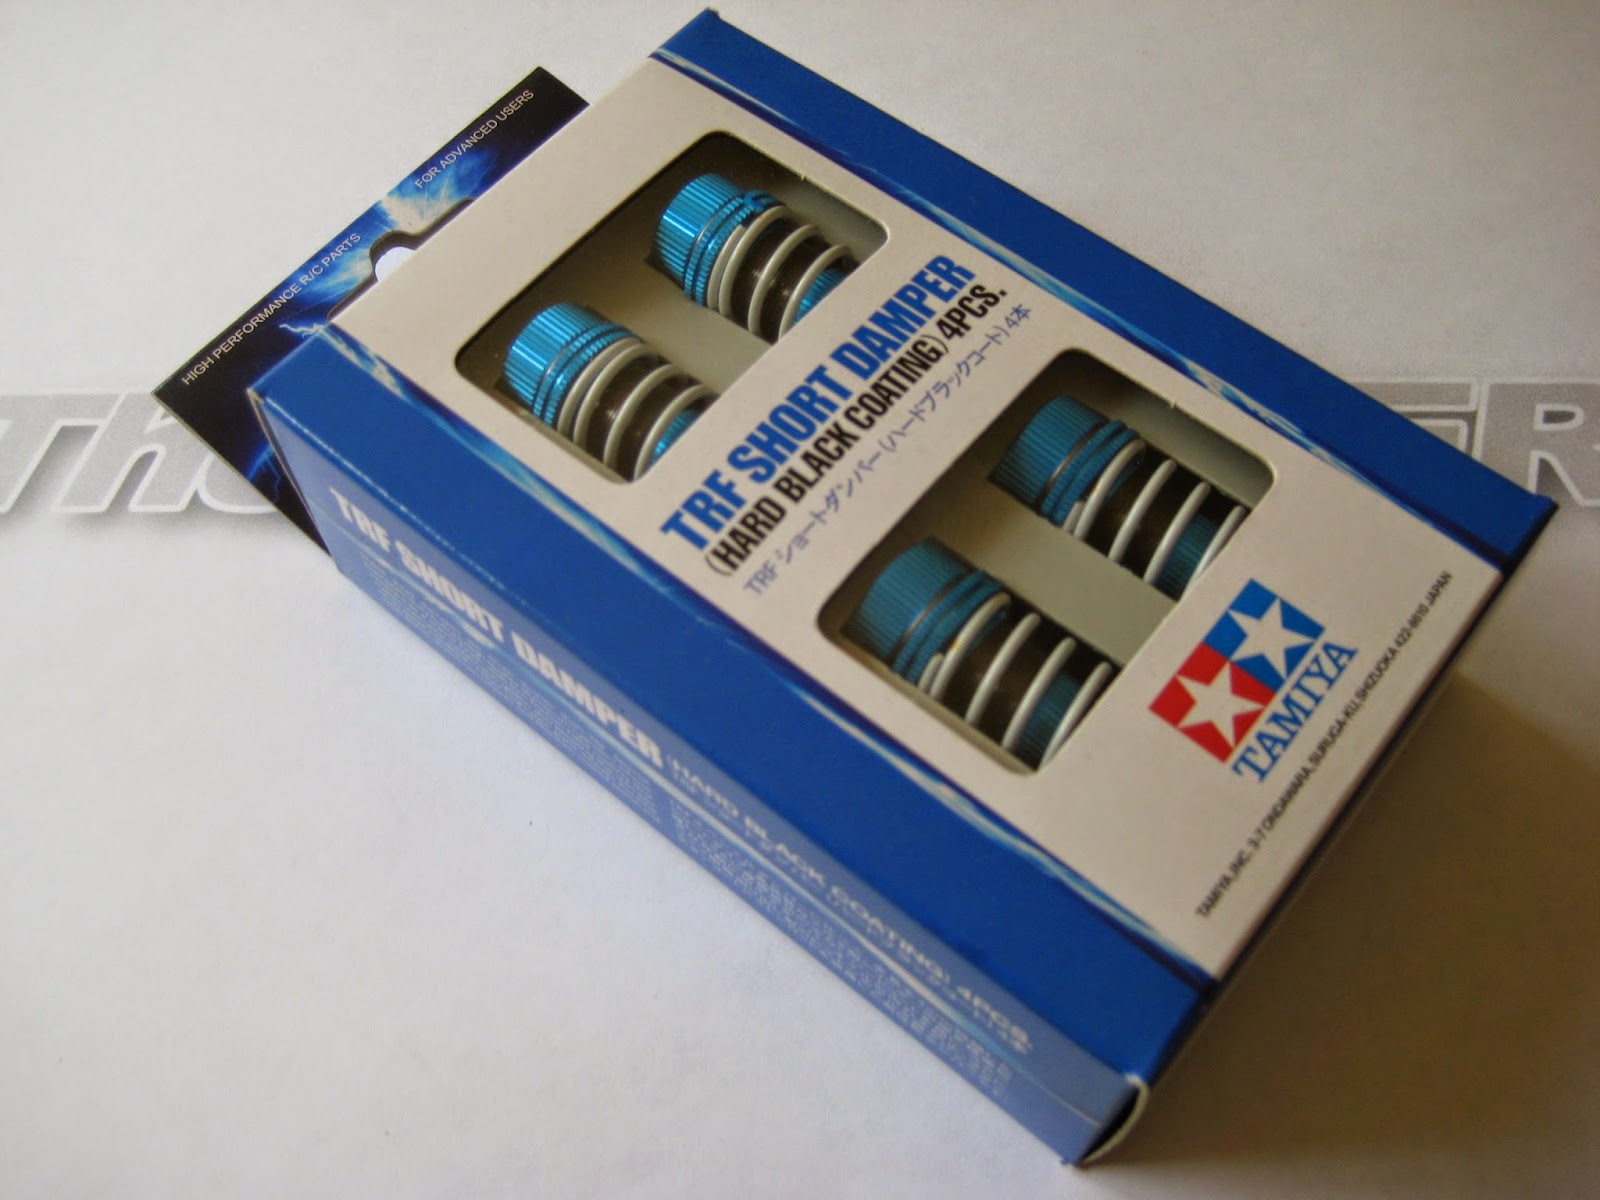 42273 Tamiya TRF Short Type Dampers Review | The RC Racer